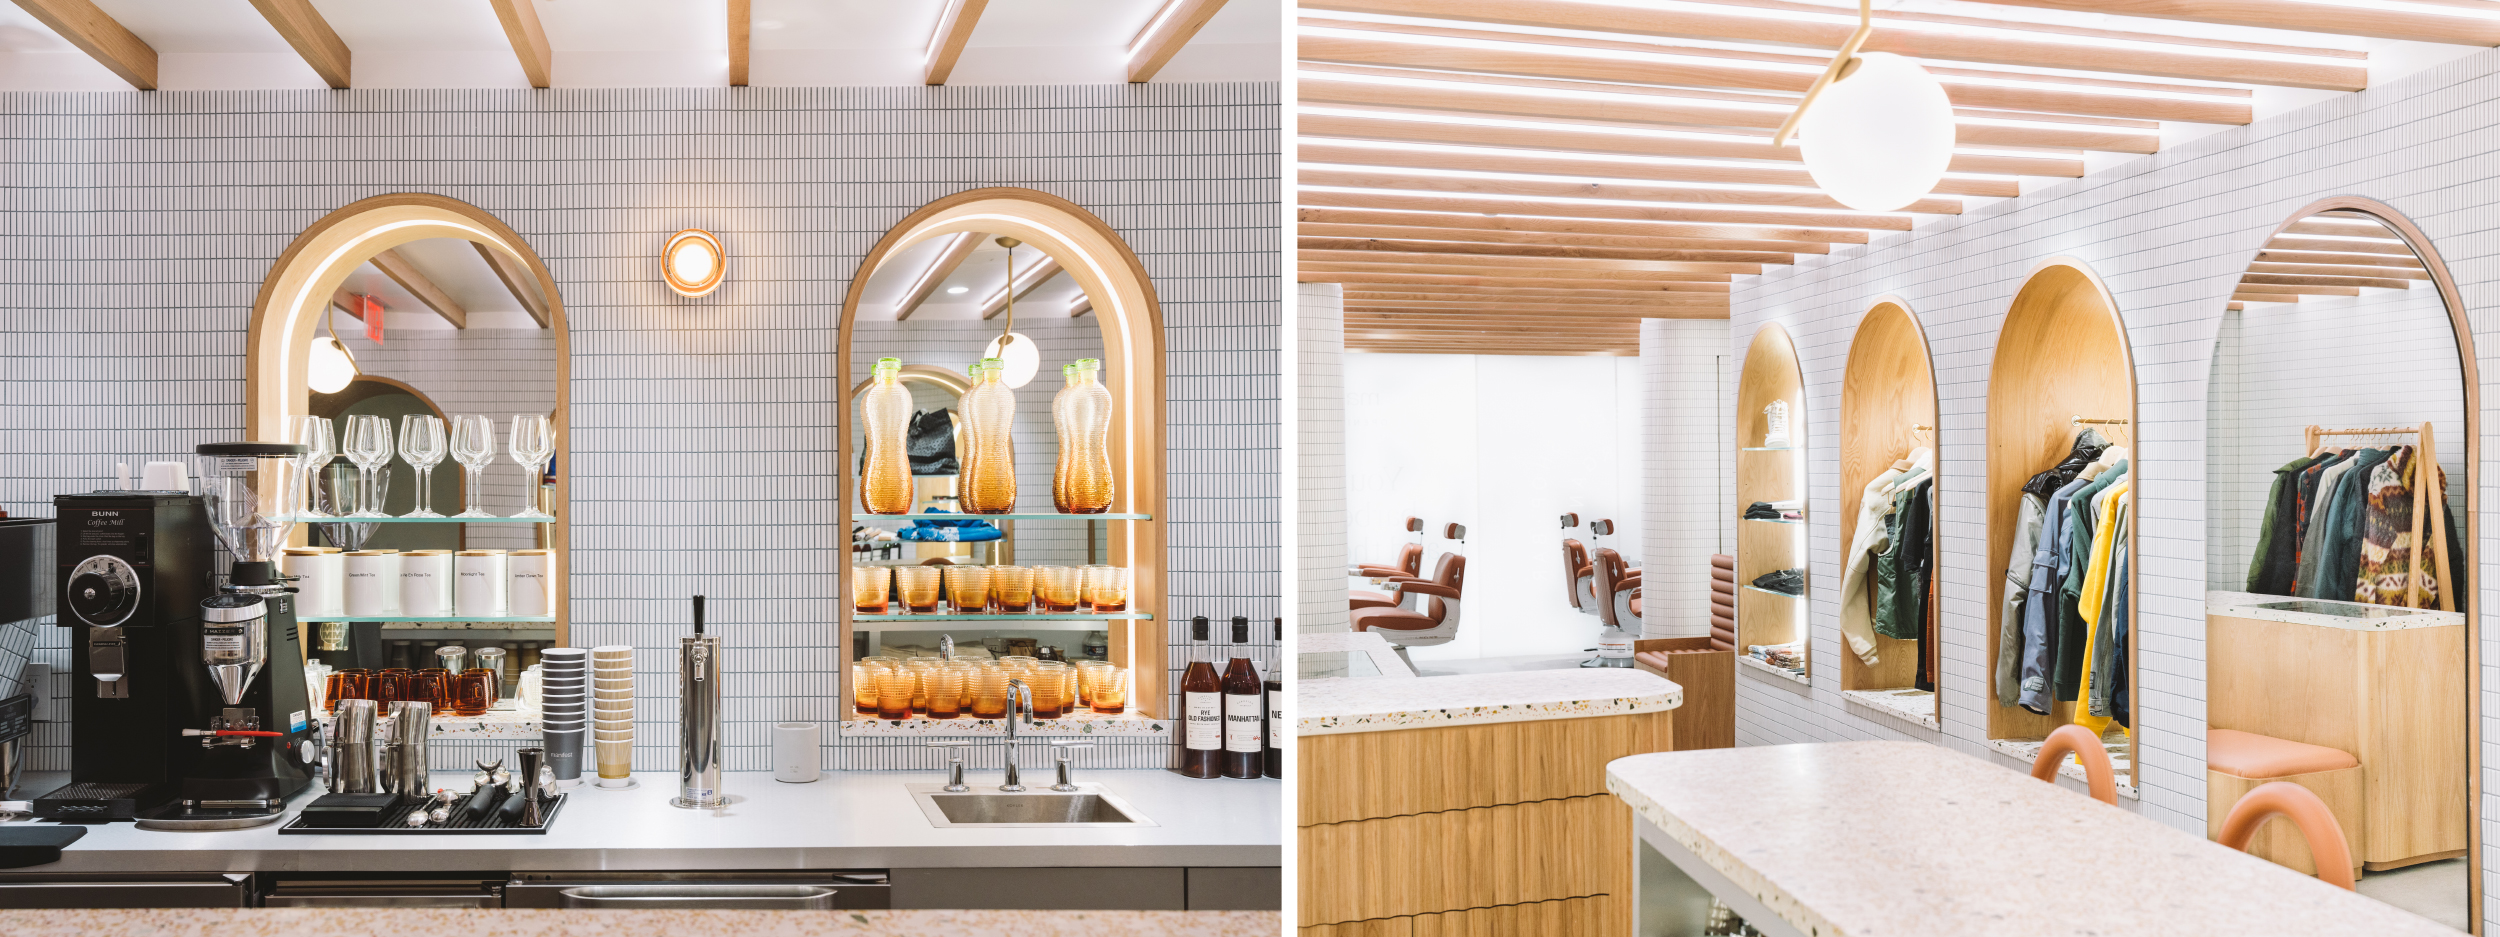 Manifest’s eclectic and personalized customer experience includes a barbershop, retail store, coffee bar and speakeasy. 📷: Karston Tannis, New York